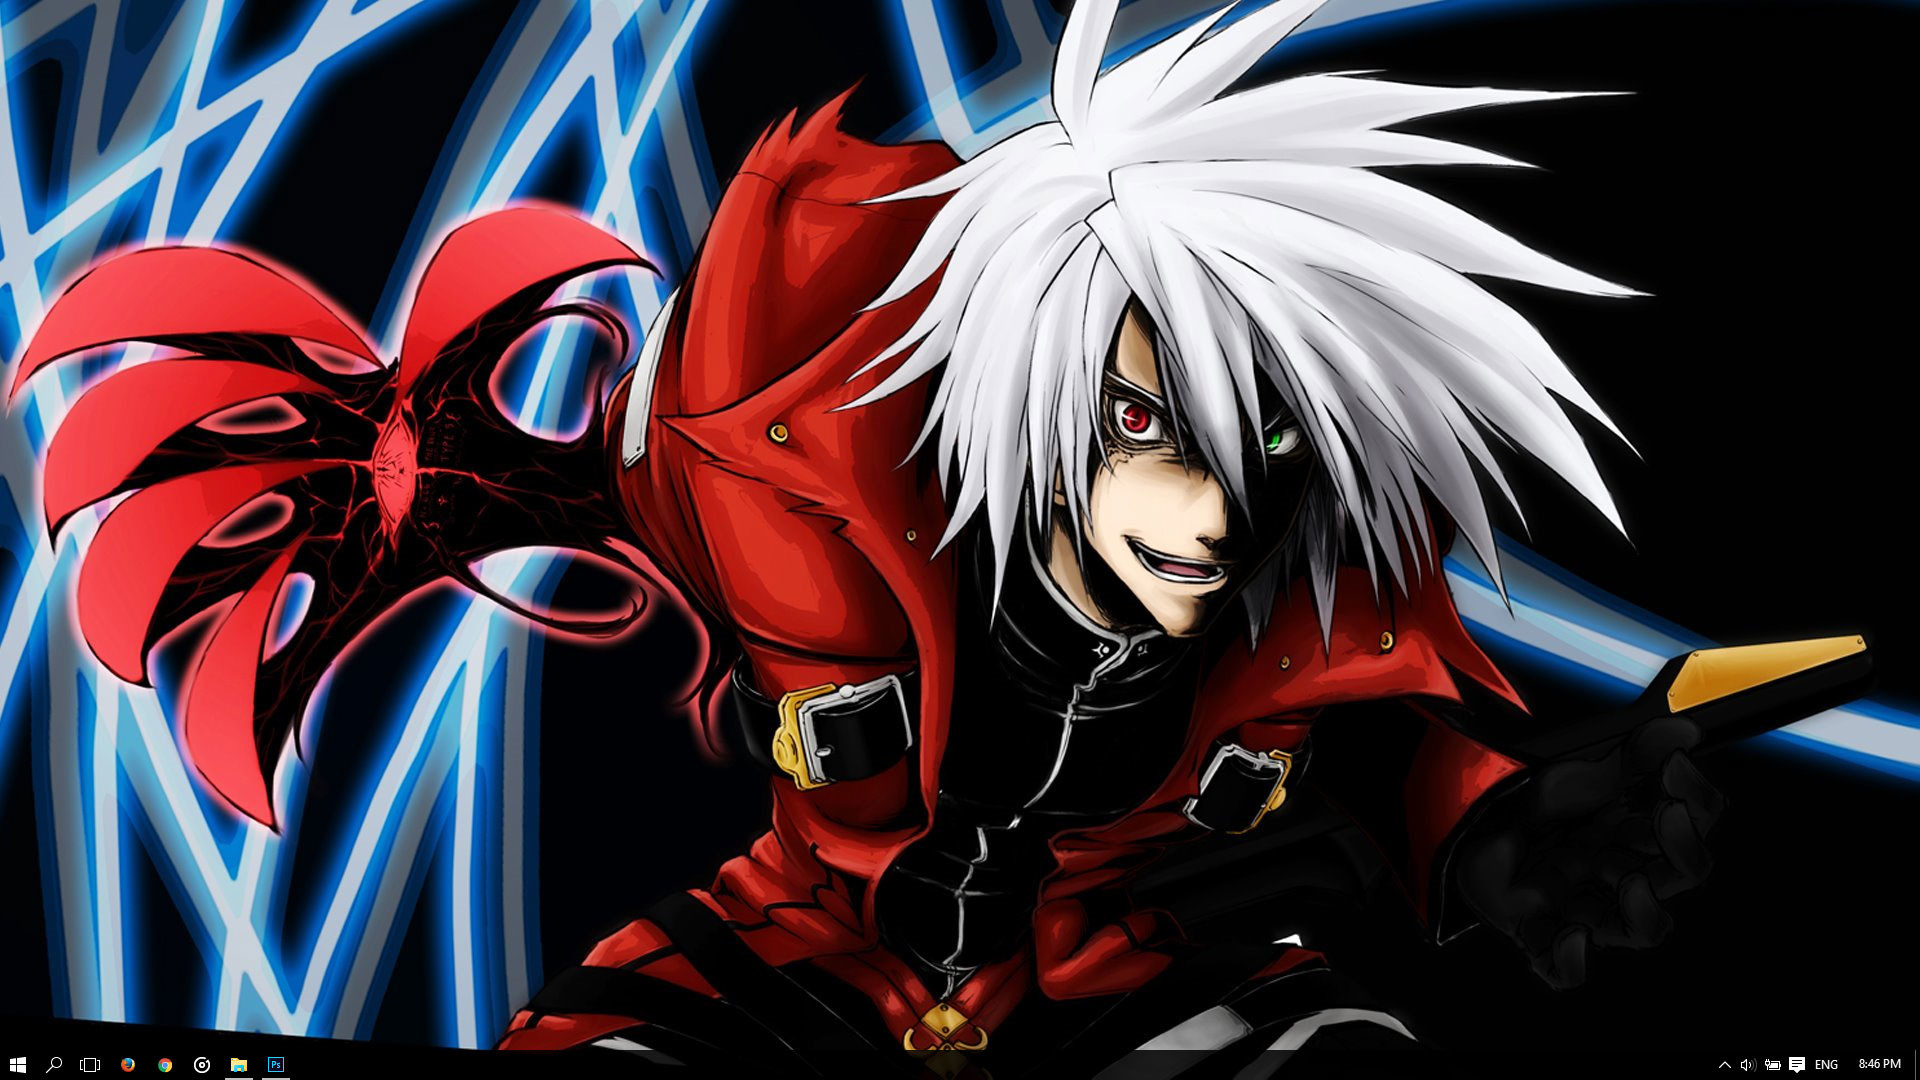 1920x1080 The lead character Ragna the Bloodedge, other characters like Noel, Iron  Tager, Rachel Alucard, Taokaka, Makoto, Litchi Faye-Ling and some others.